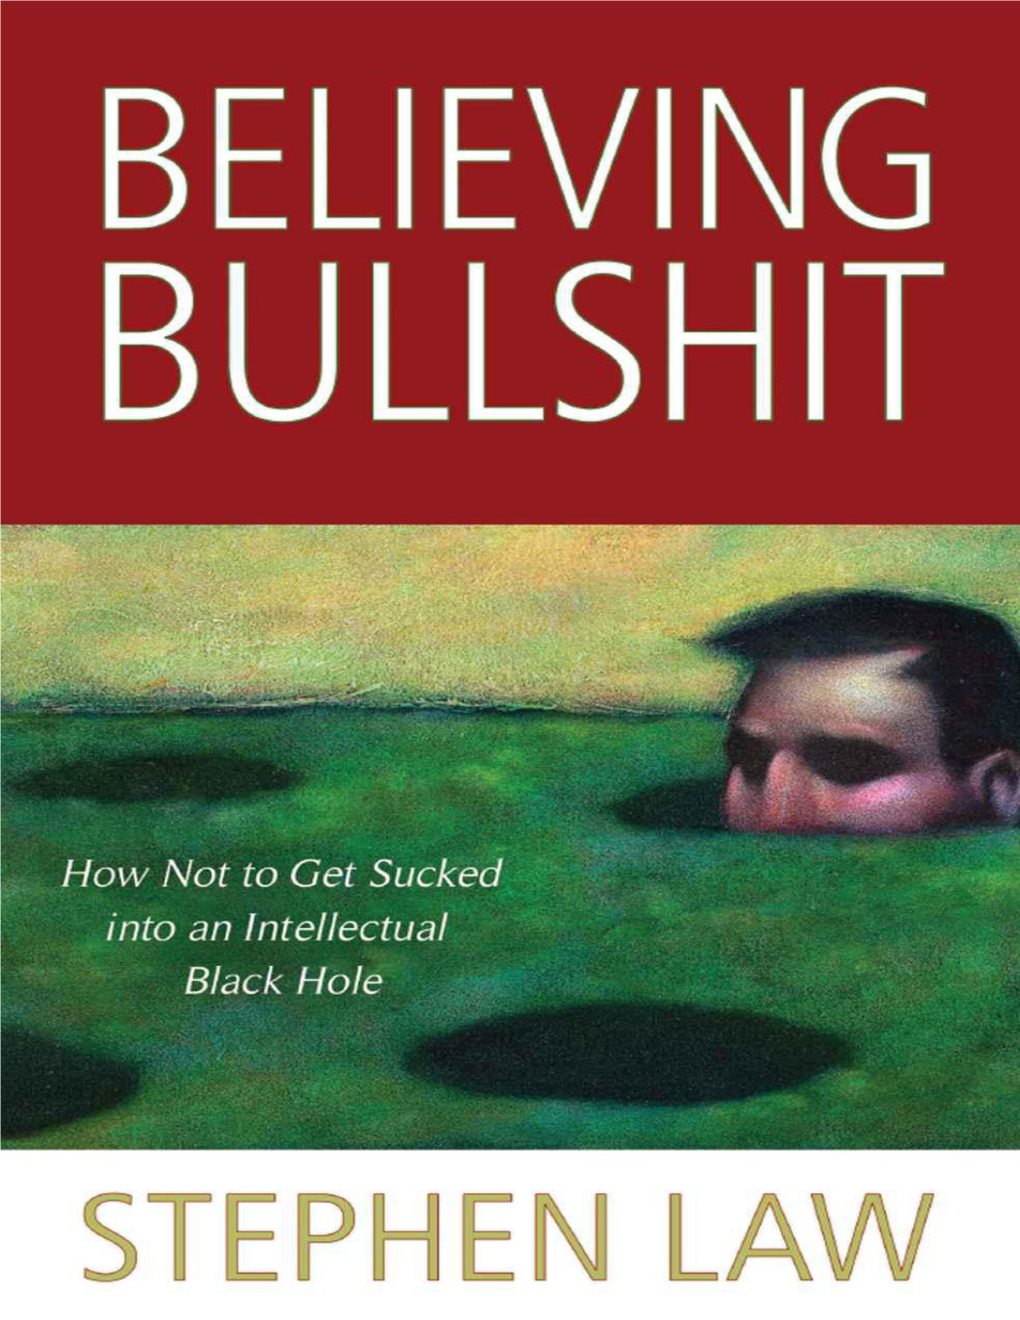 Believing Bullshit: How Not to Get Sucked Into an Intellectual Black Hole